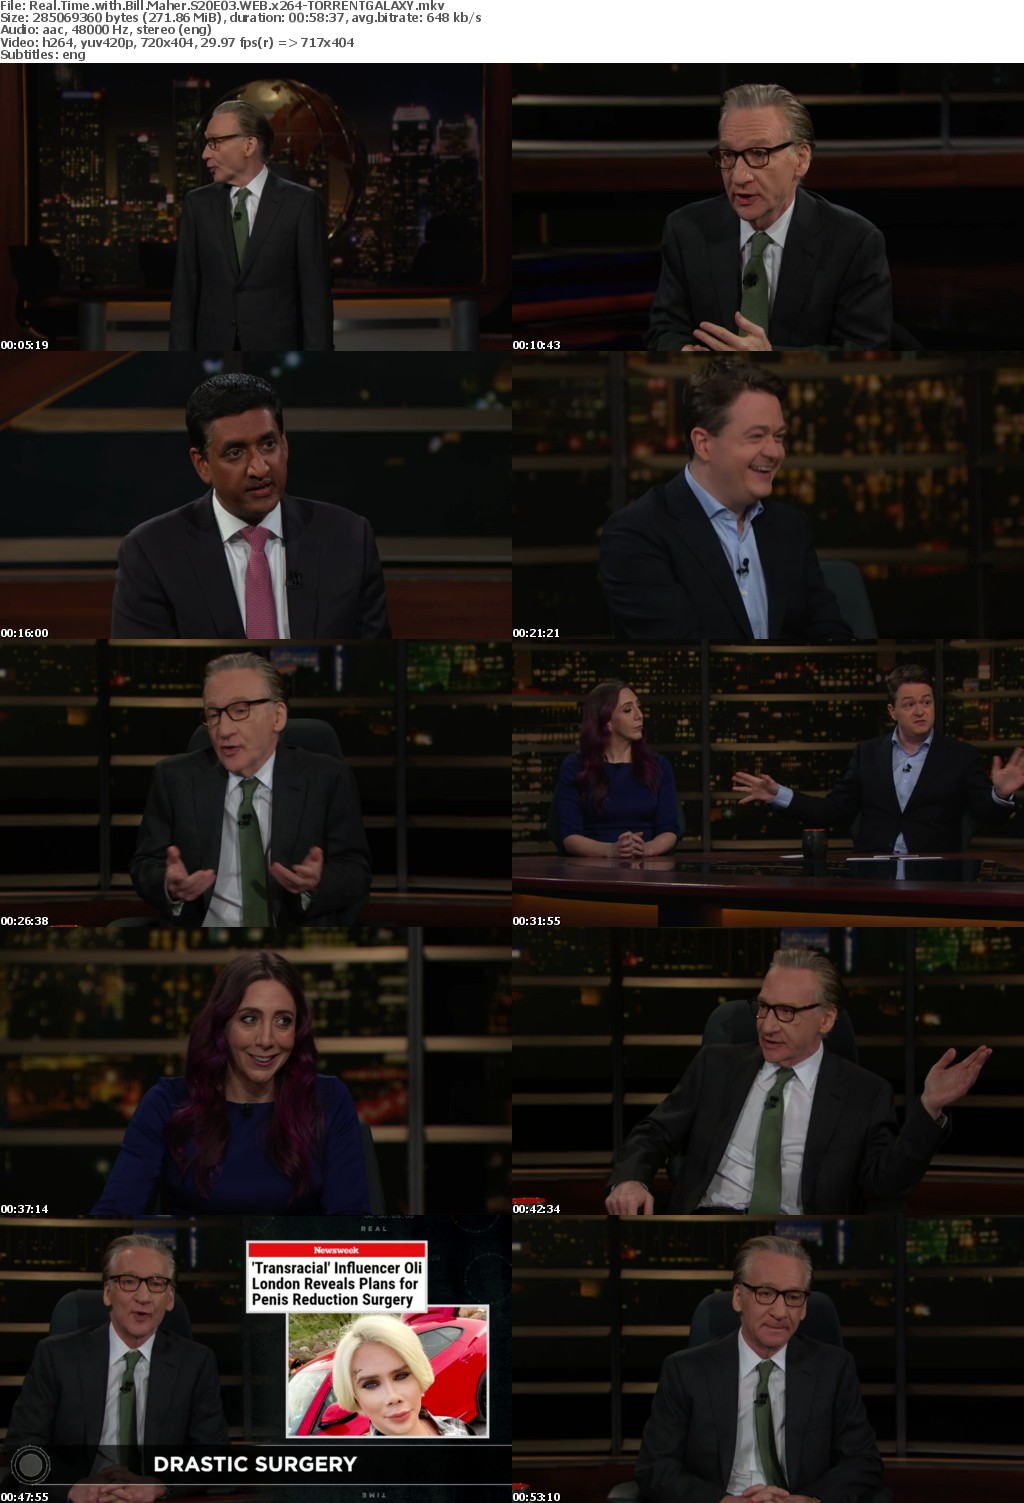 Real Time with Bill Maher S20E03 WEB x264-GALAXY